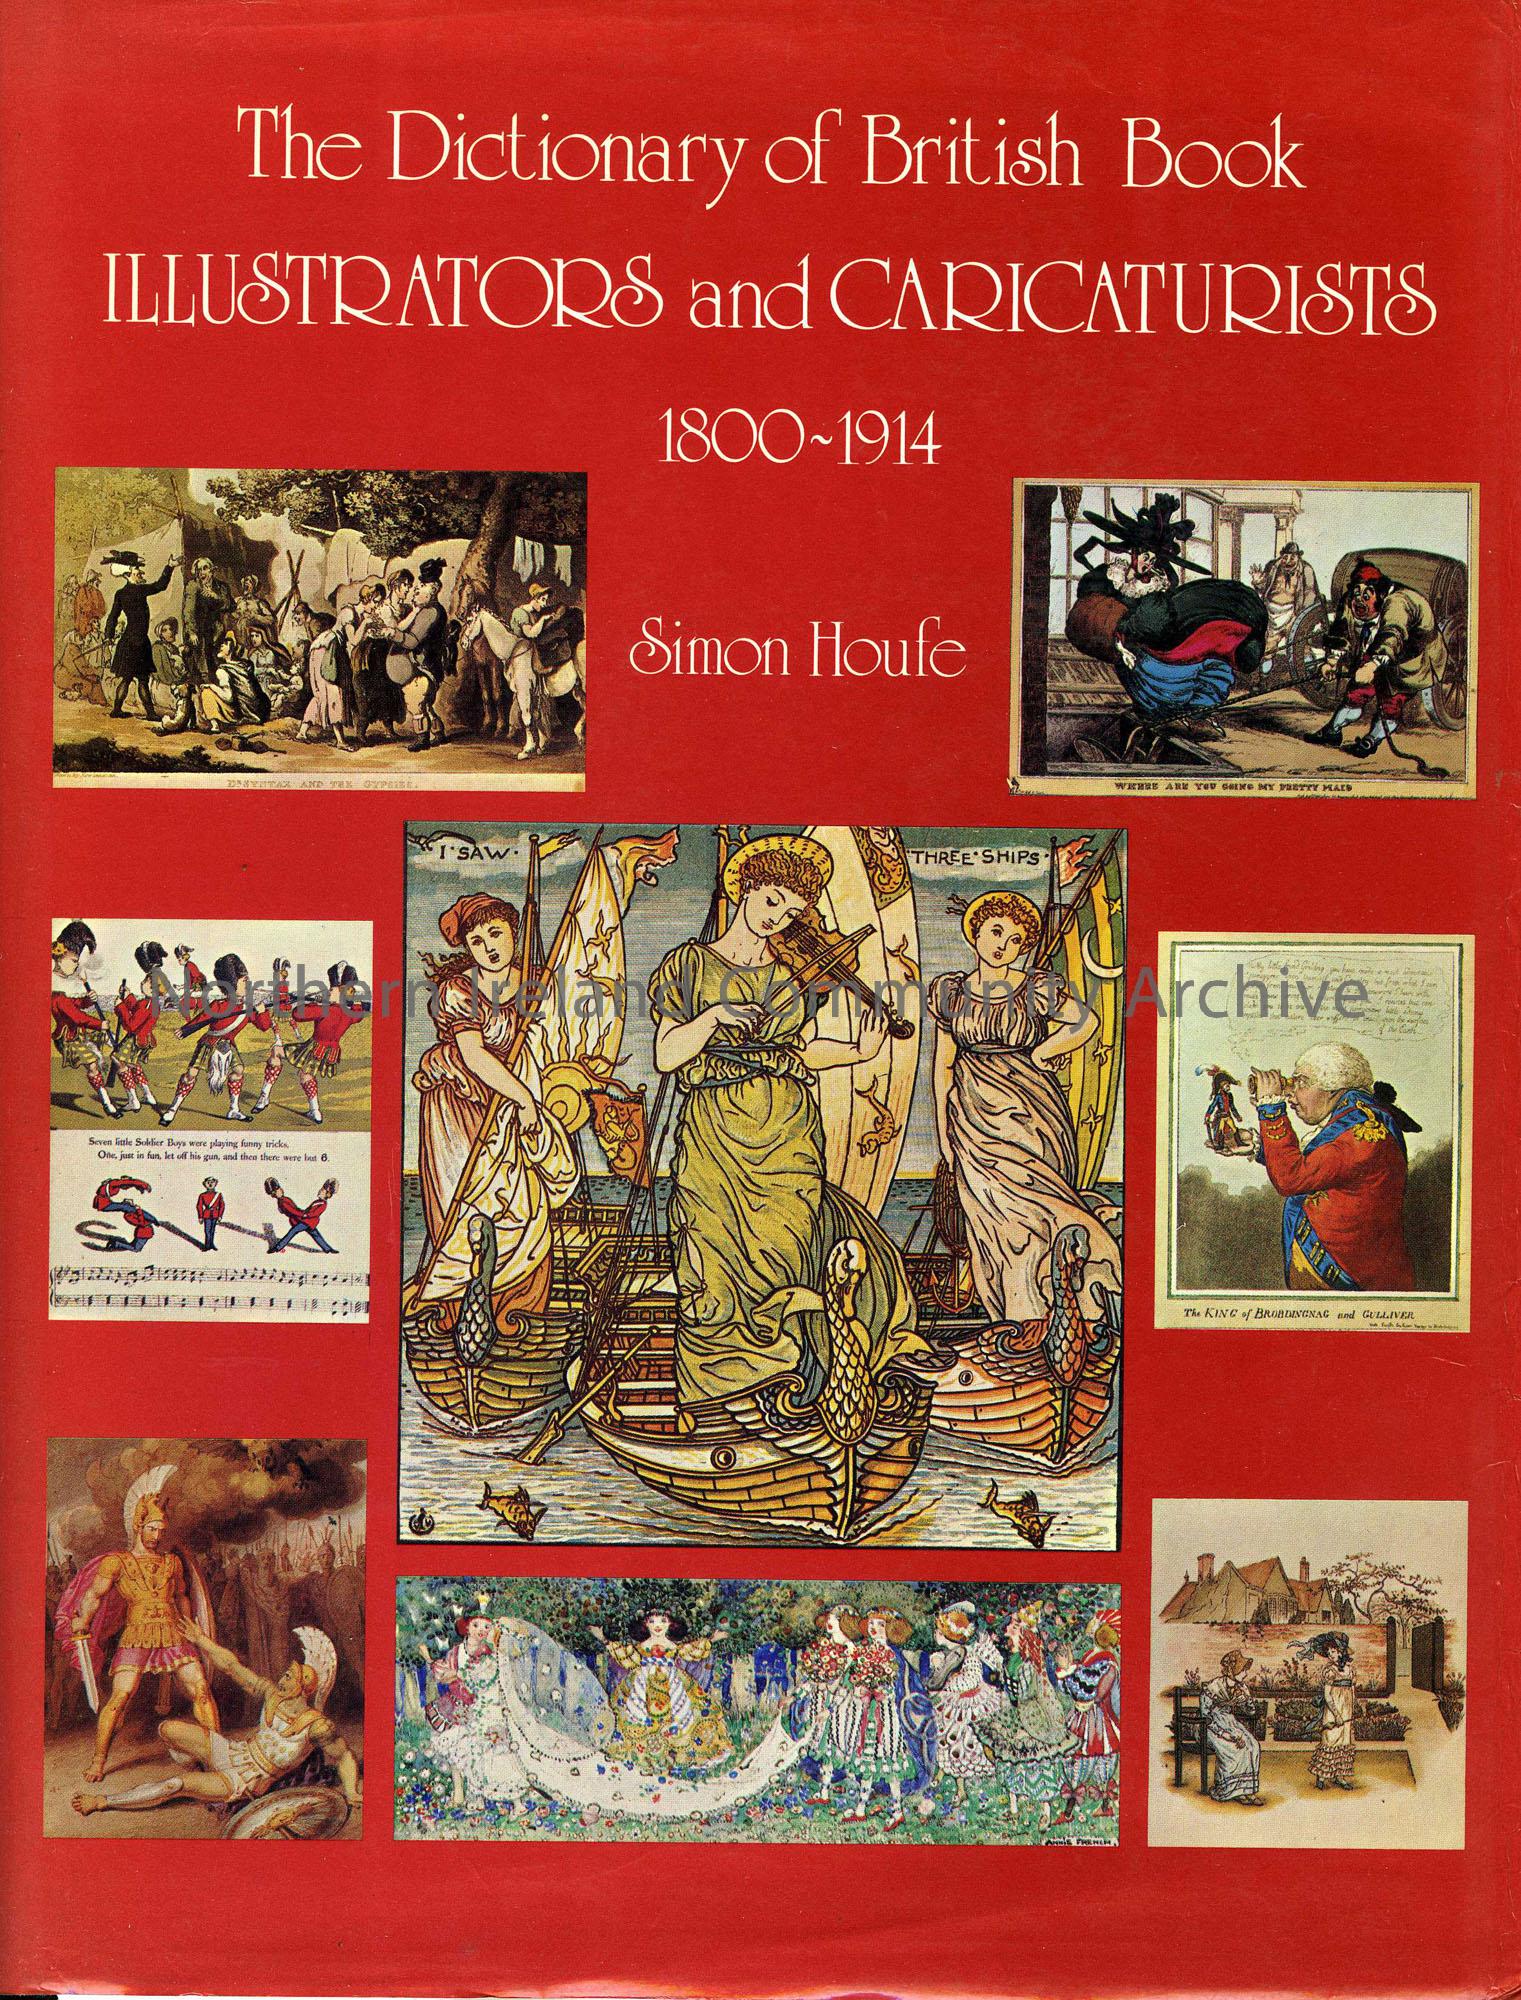 book titled, The Dictionary of British Illustrators and Caricaturists 1800-1914. By Simon Houfe (6310)